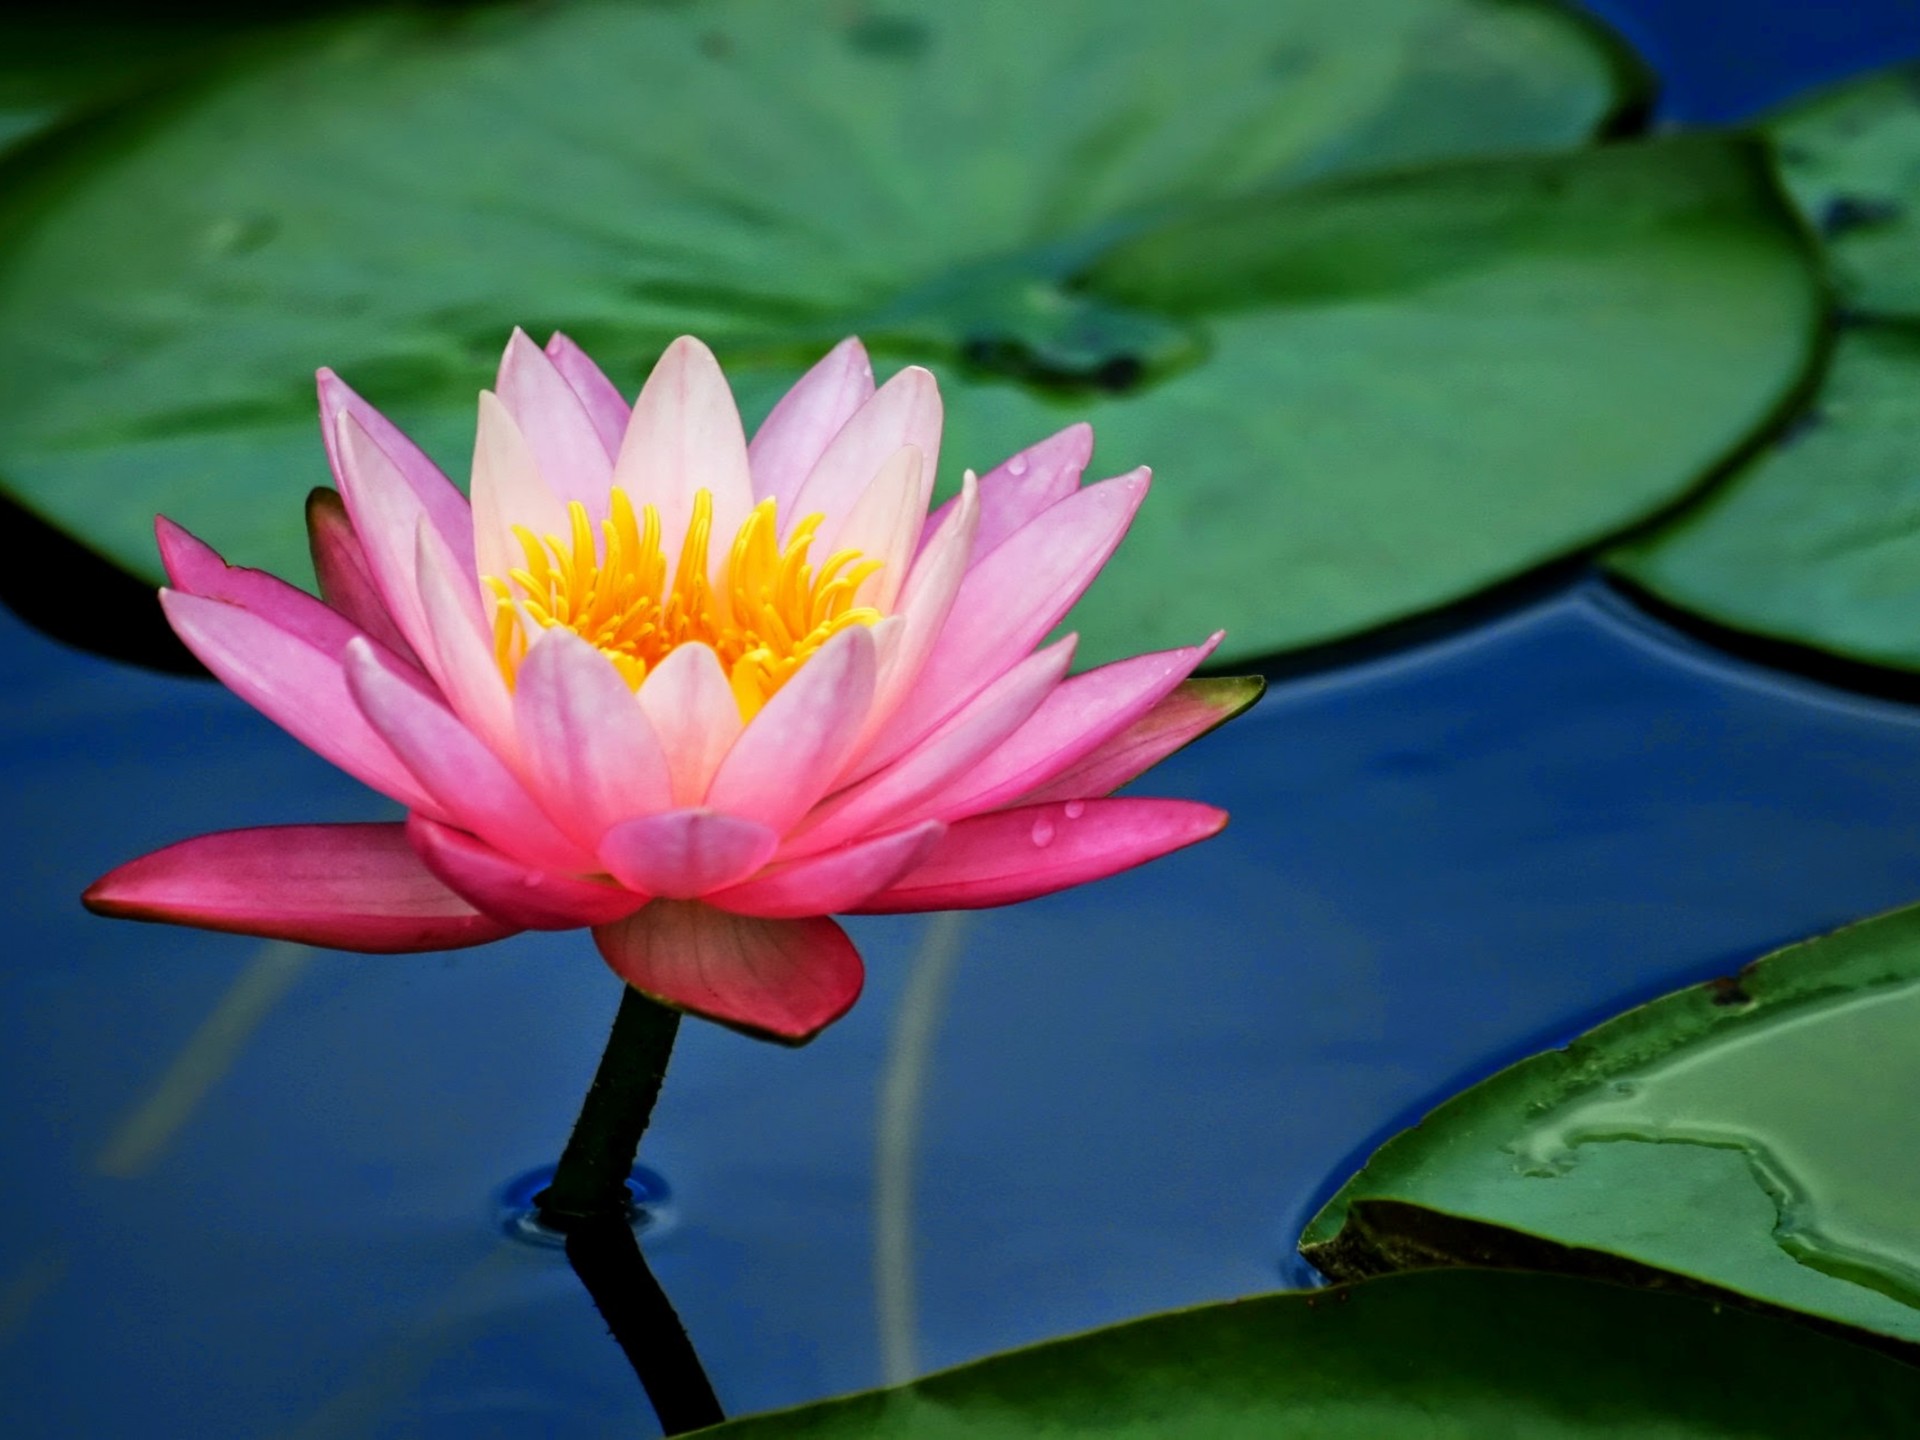 Flower Pink Lotus Flower And Lily Pads 2560x1600 : Wallpapers13.com